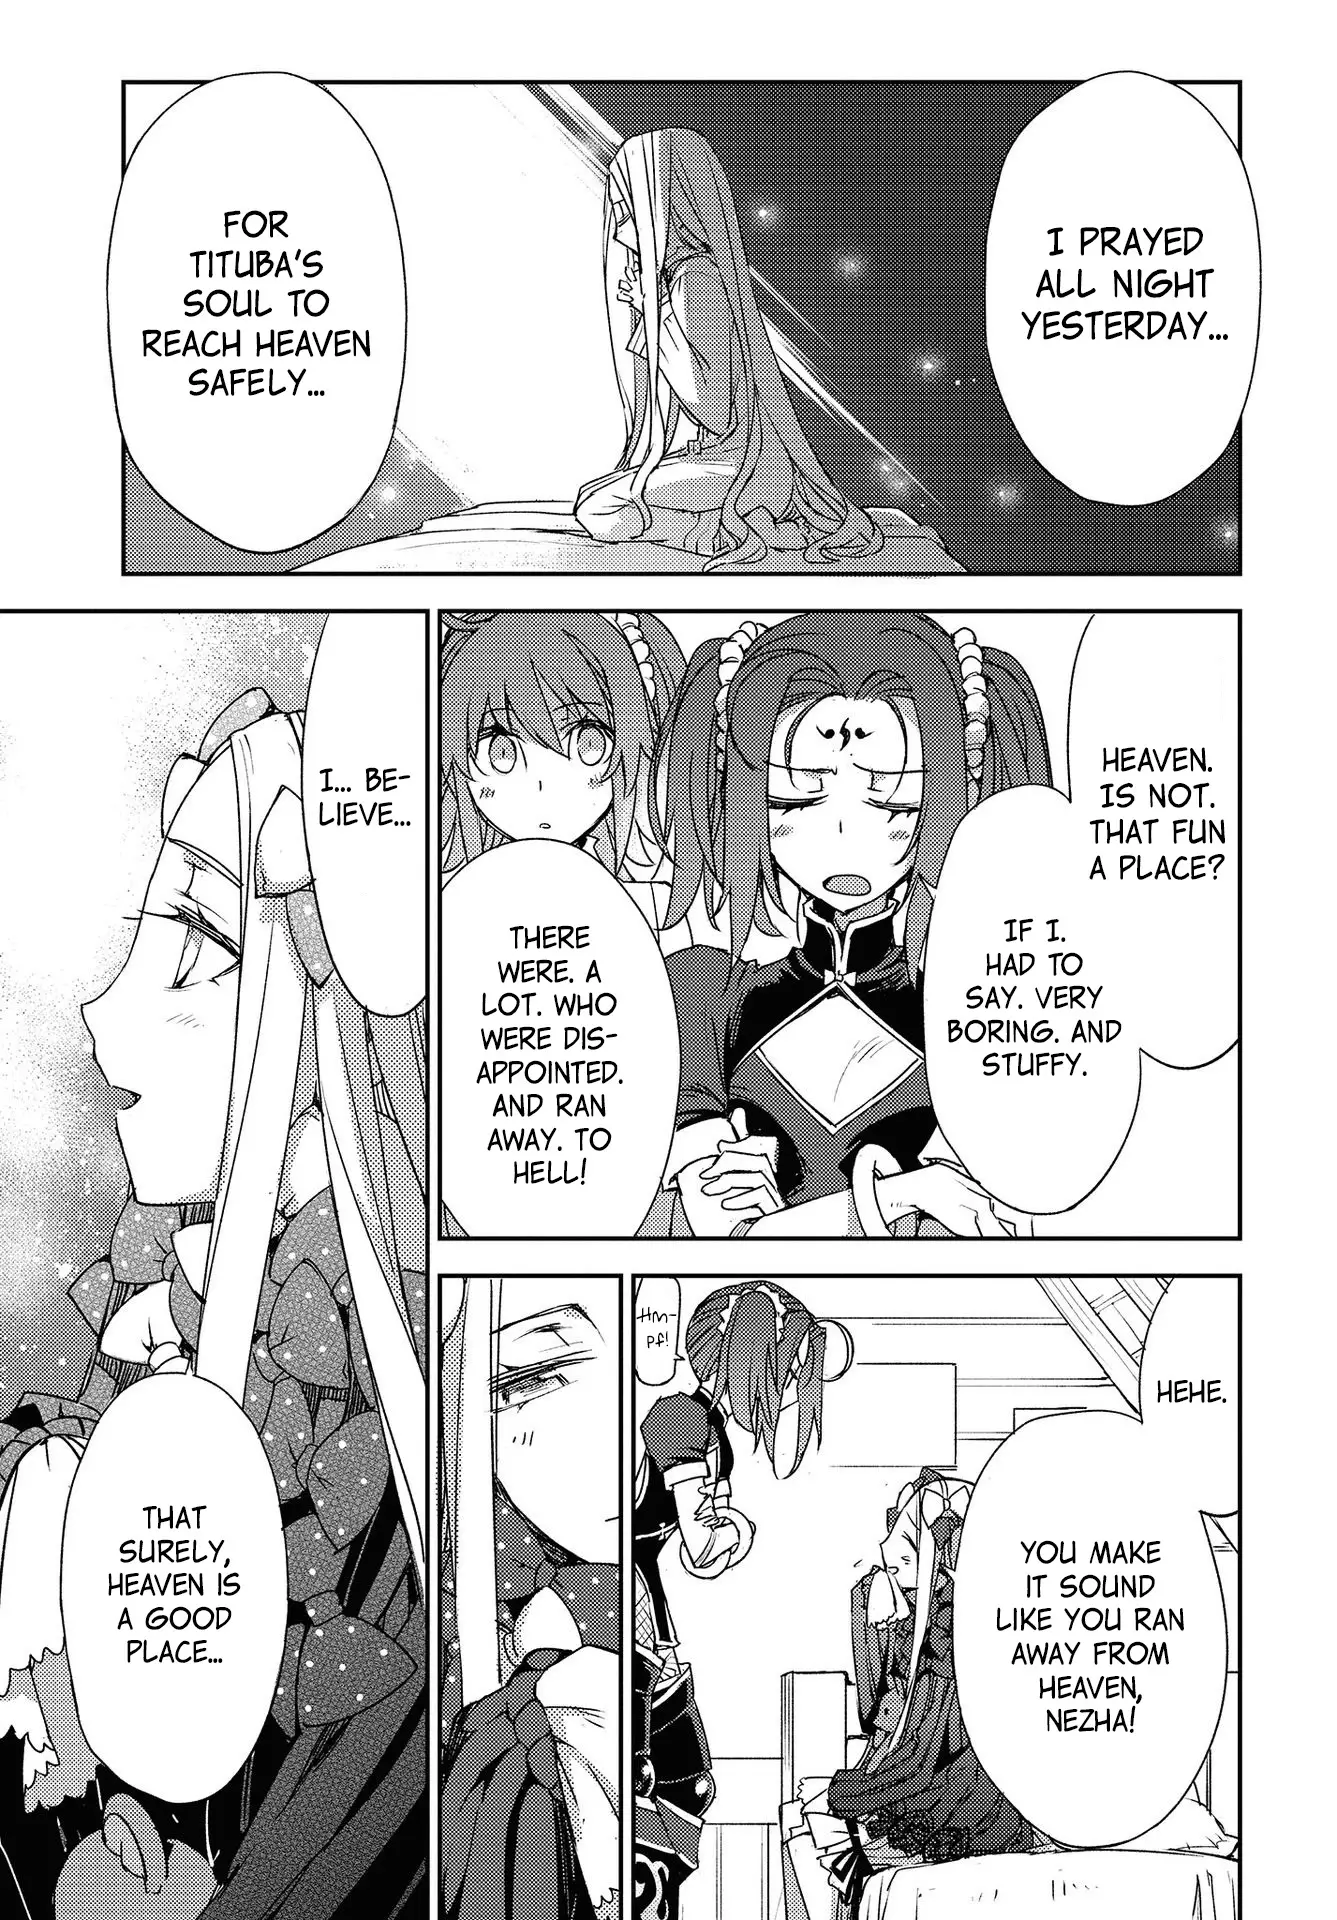 Fate/grand Order: Epic Of Remnant: Pseudo-Singularity Iv: The Forbidden Advent Garden, Salem - Heretical Salem - 20 page 17-4bc3358a